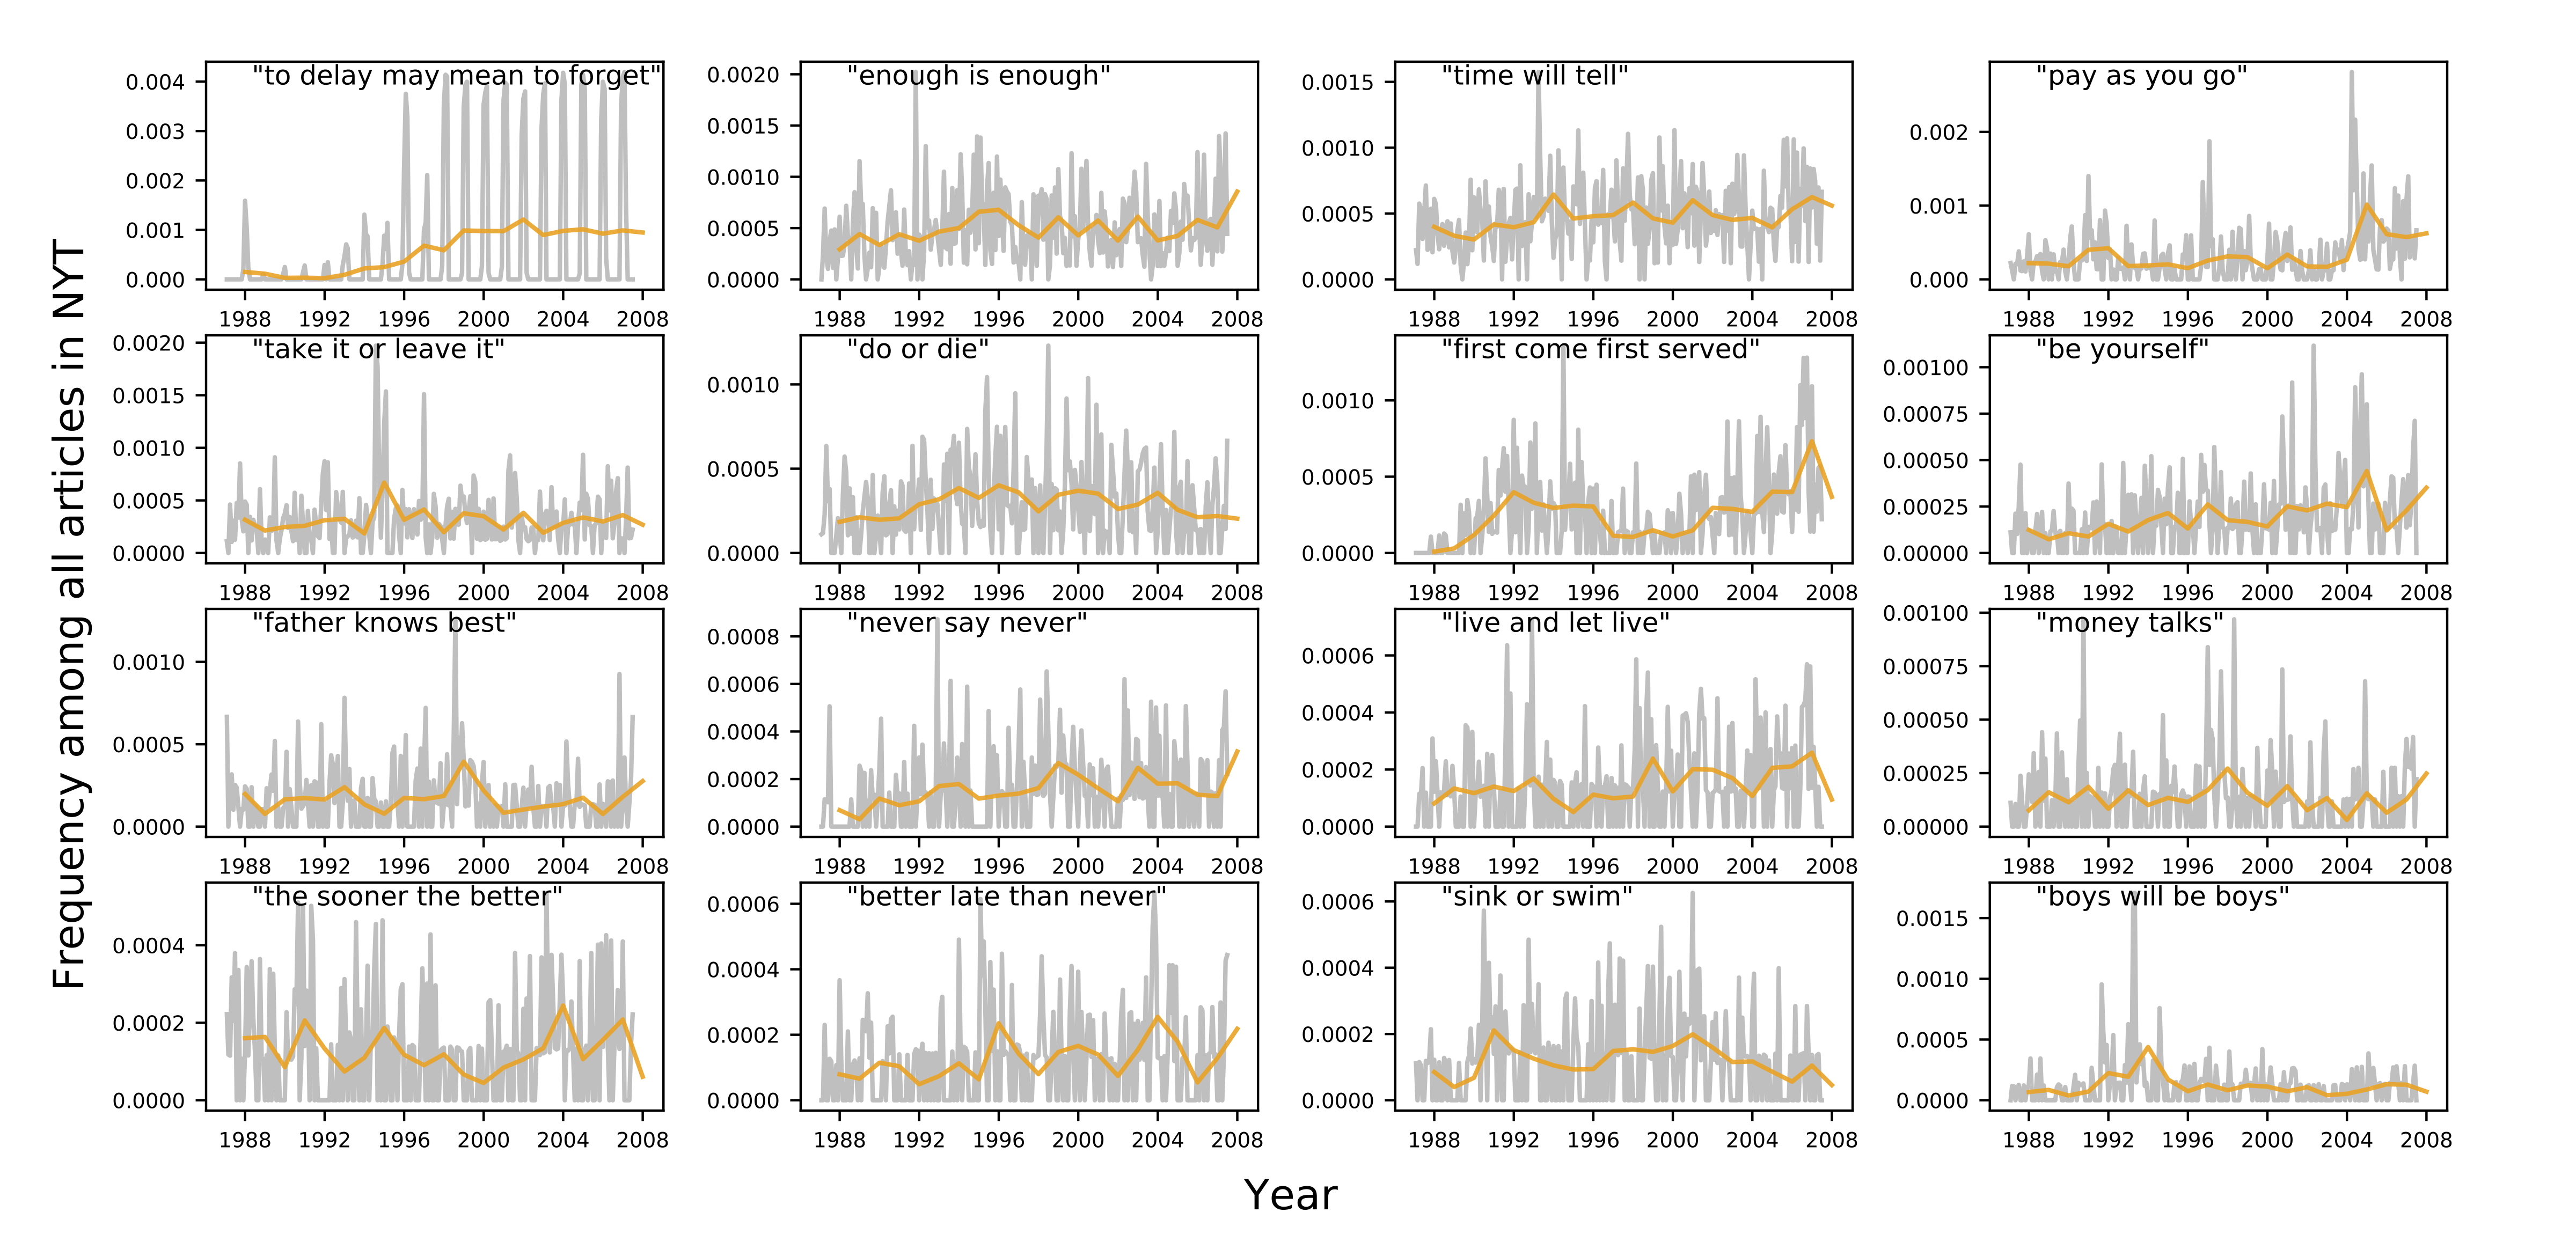 sixteen frequency charts showing frequency counts for key phrases over time. the y-axes show frequencies and the x-axes show years from 1988-2008